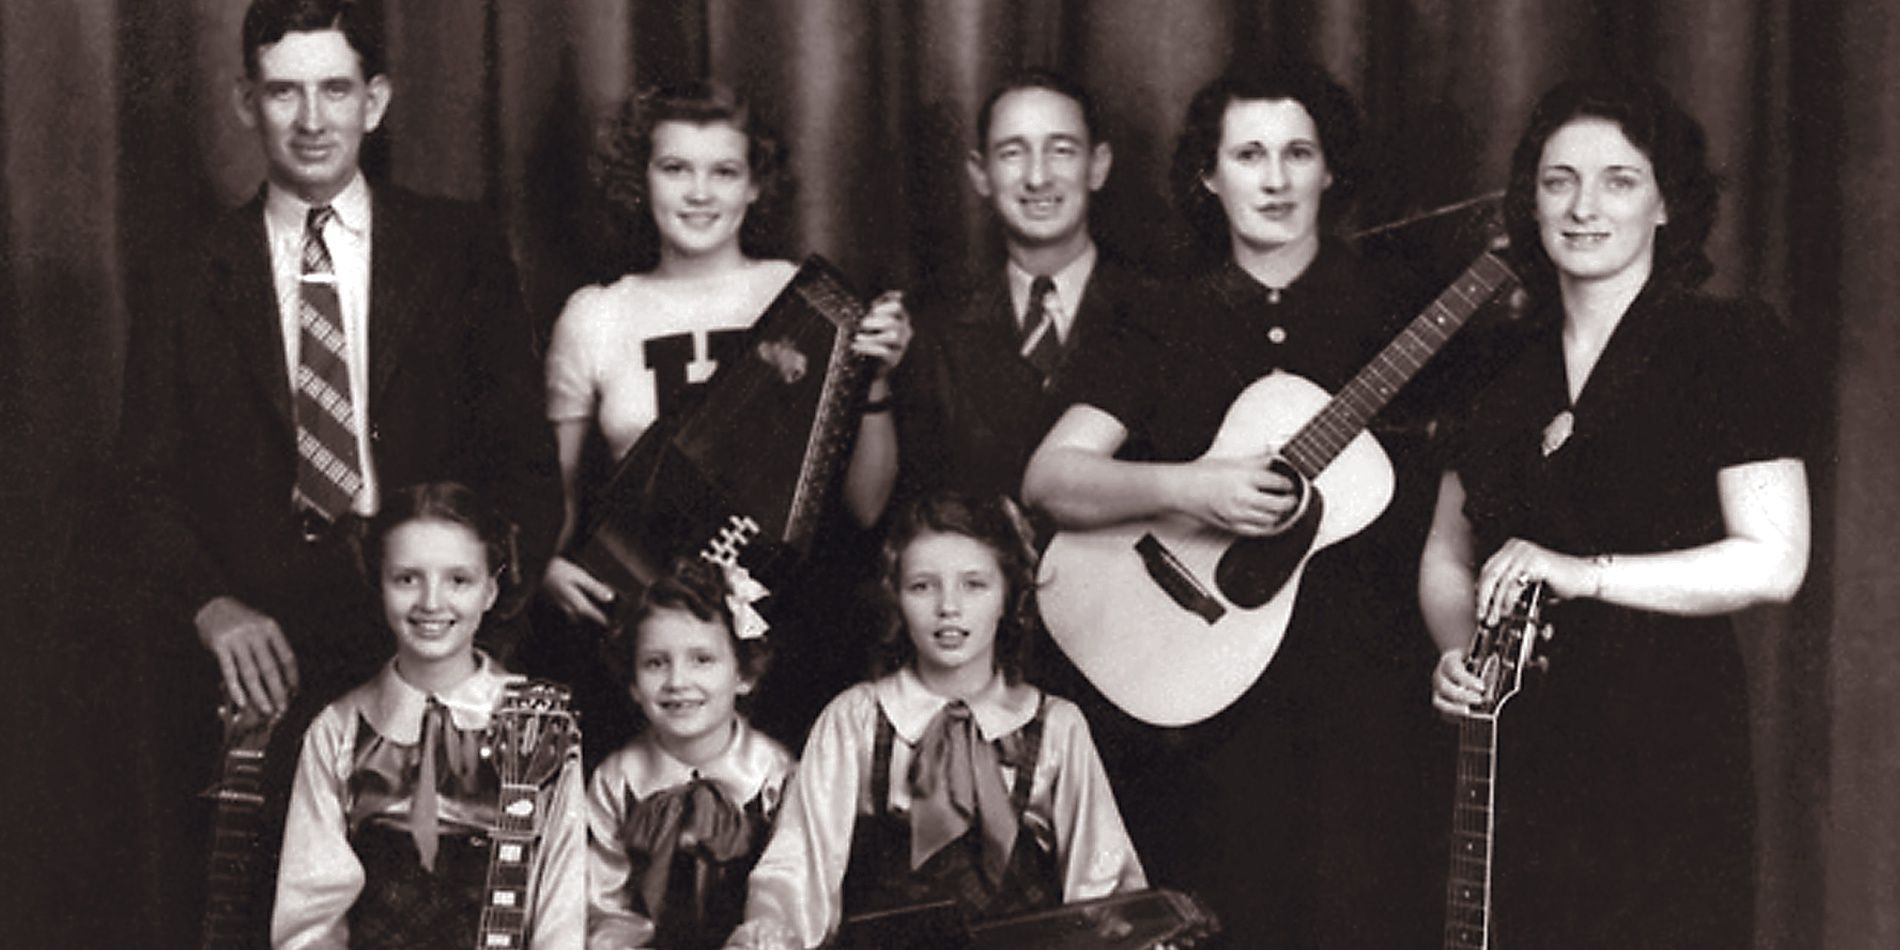 June Carter and her family in an old photograph